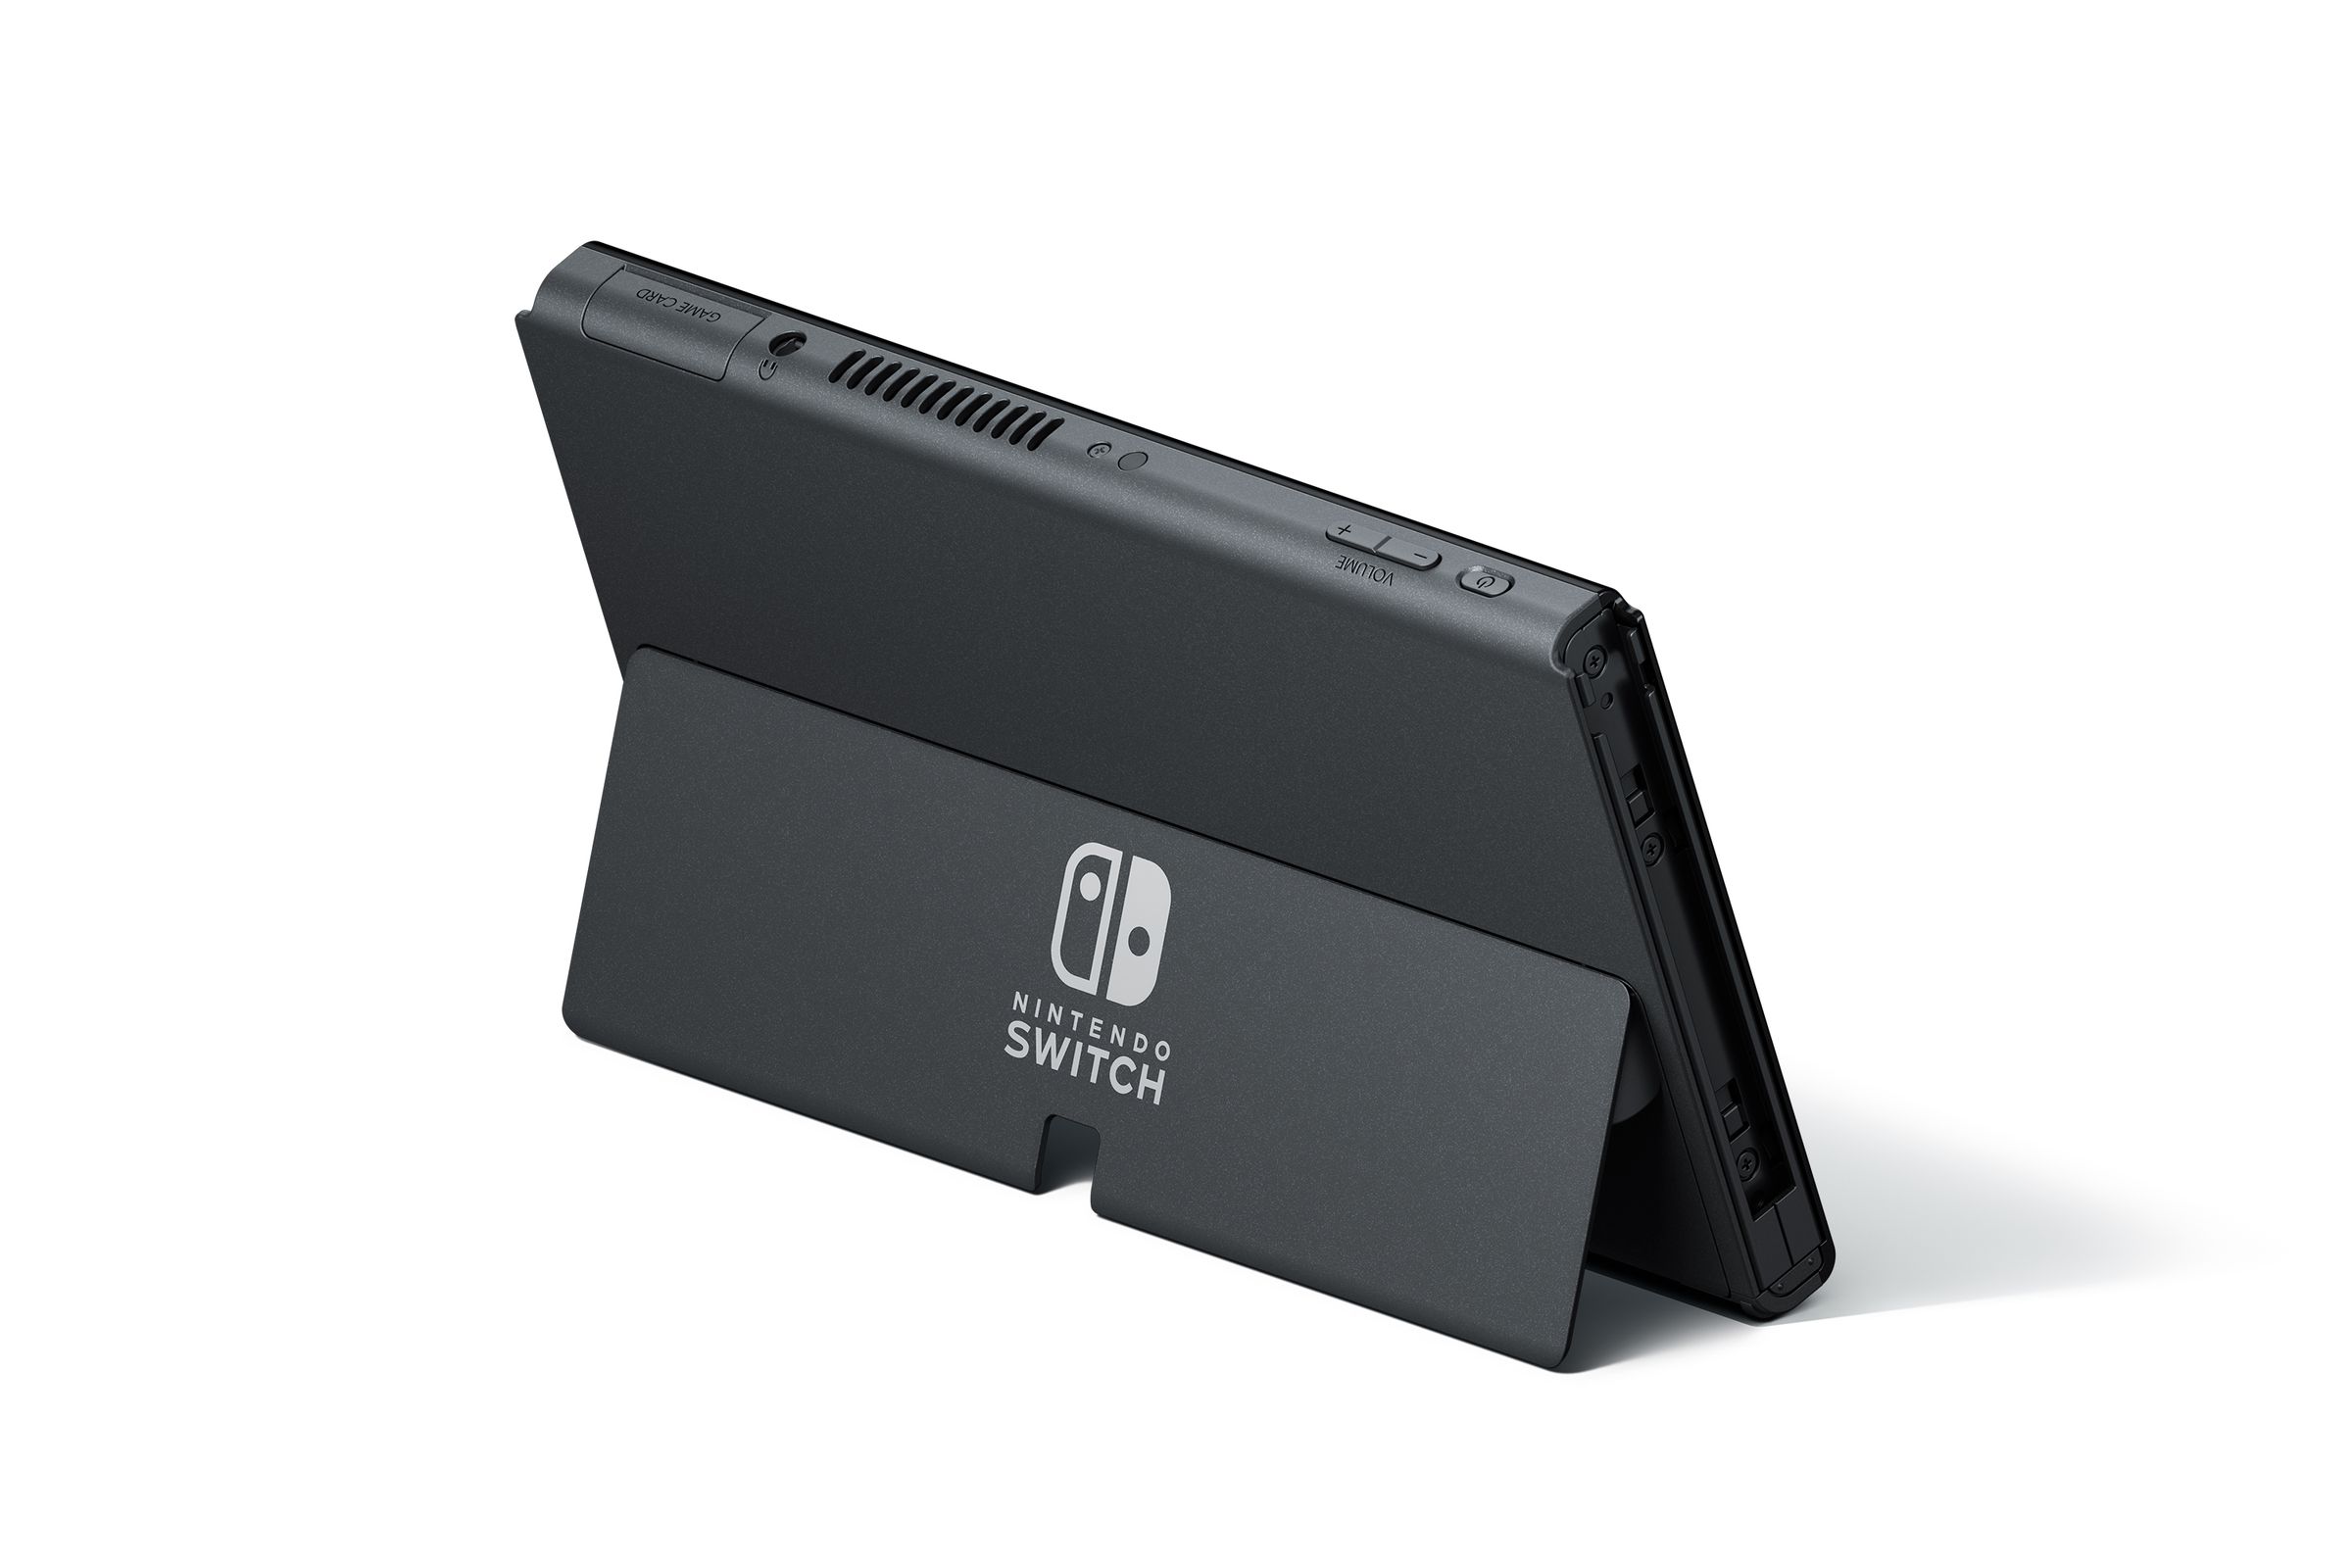 The new kickstand on the Switch is greatly improved over the original